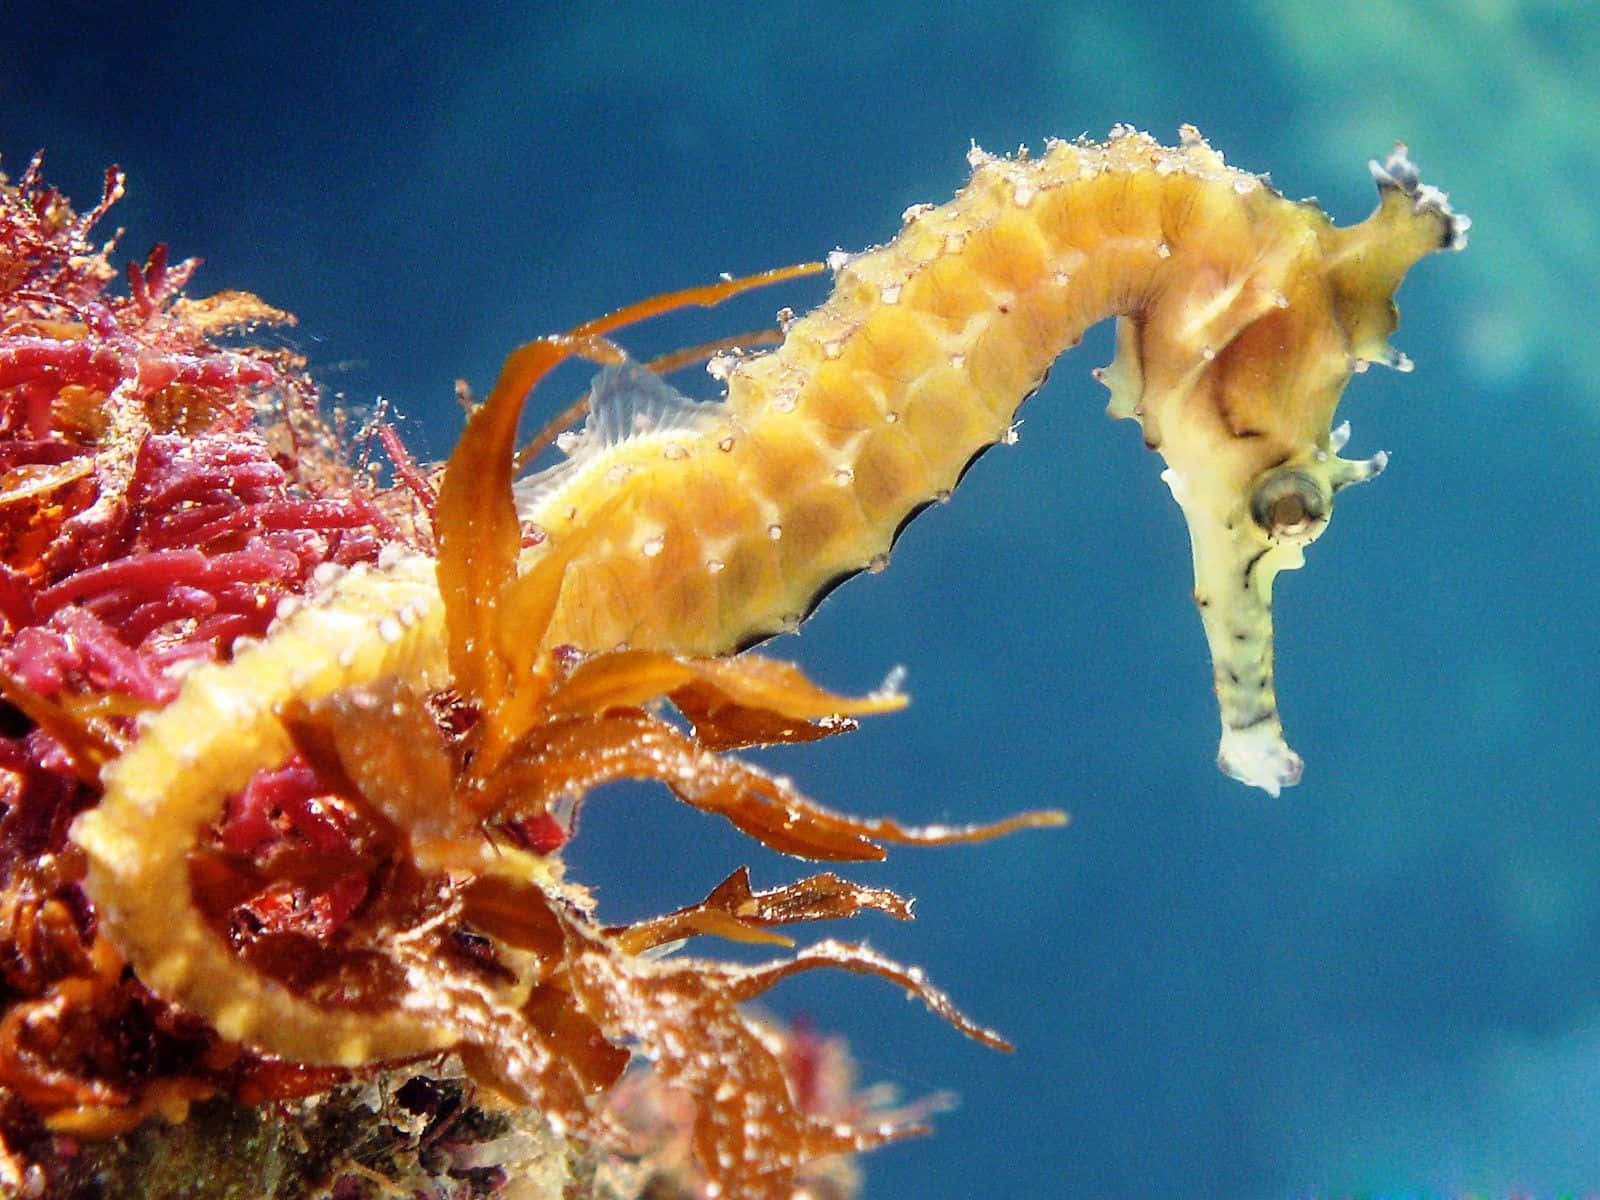 A beautiful seahorse rests among the coral reef